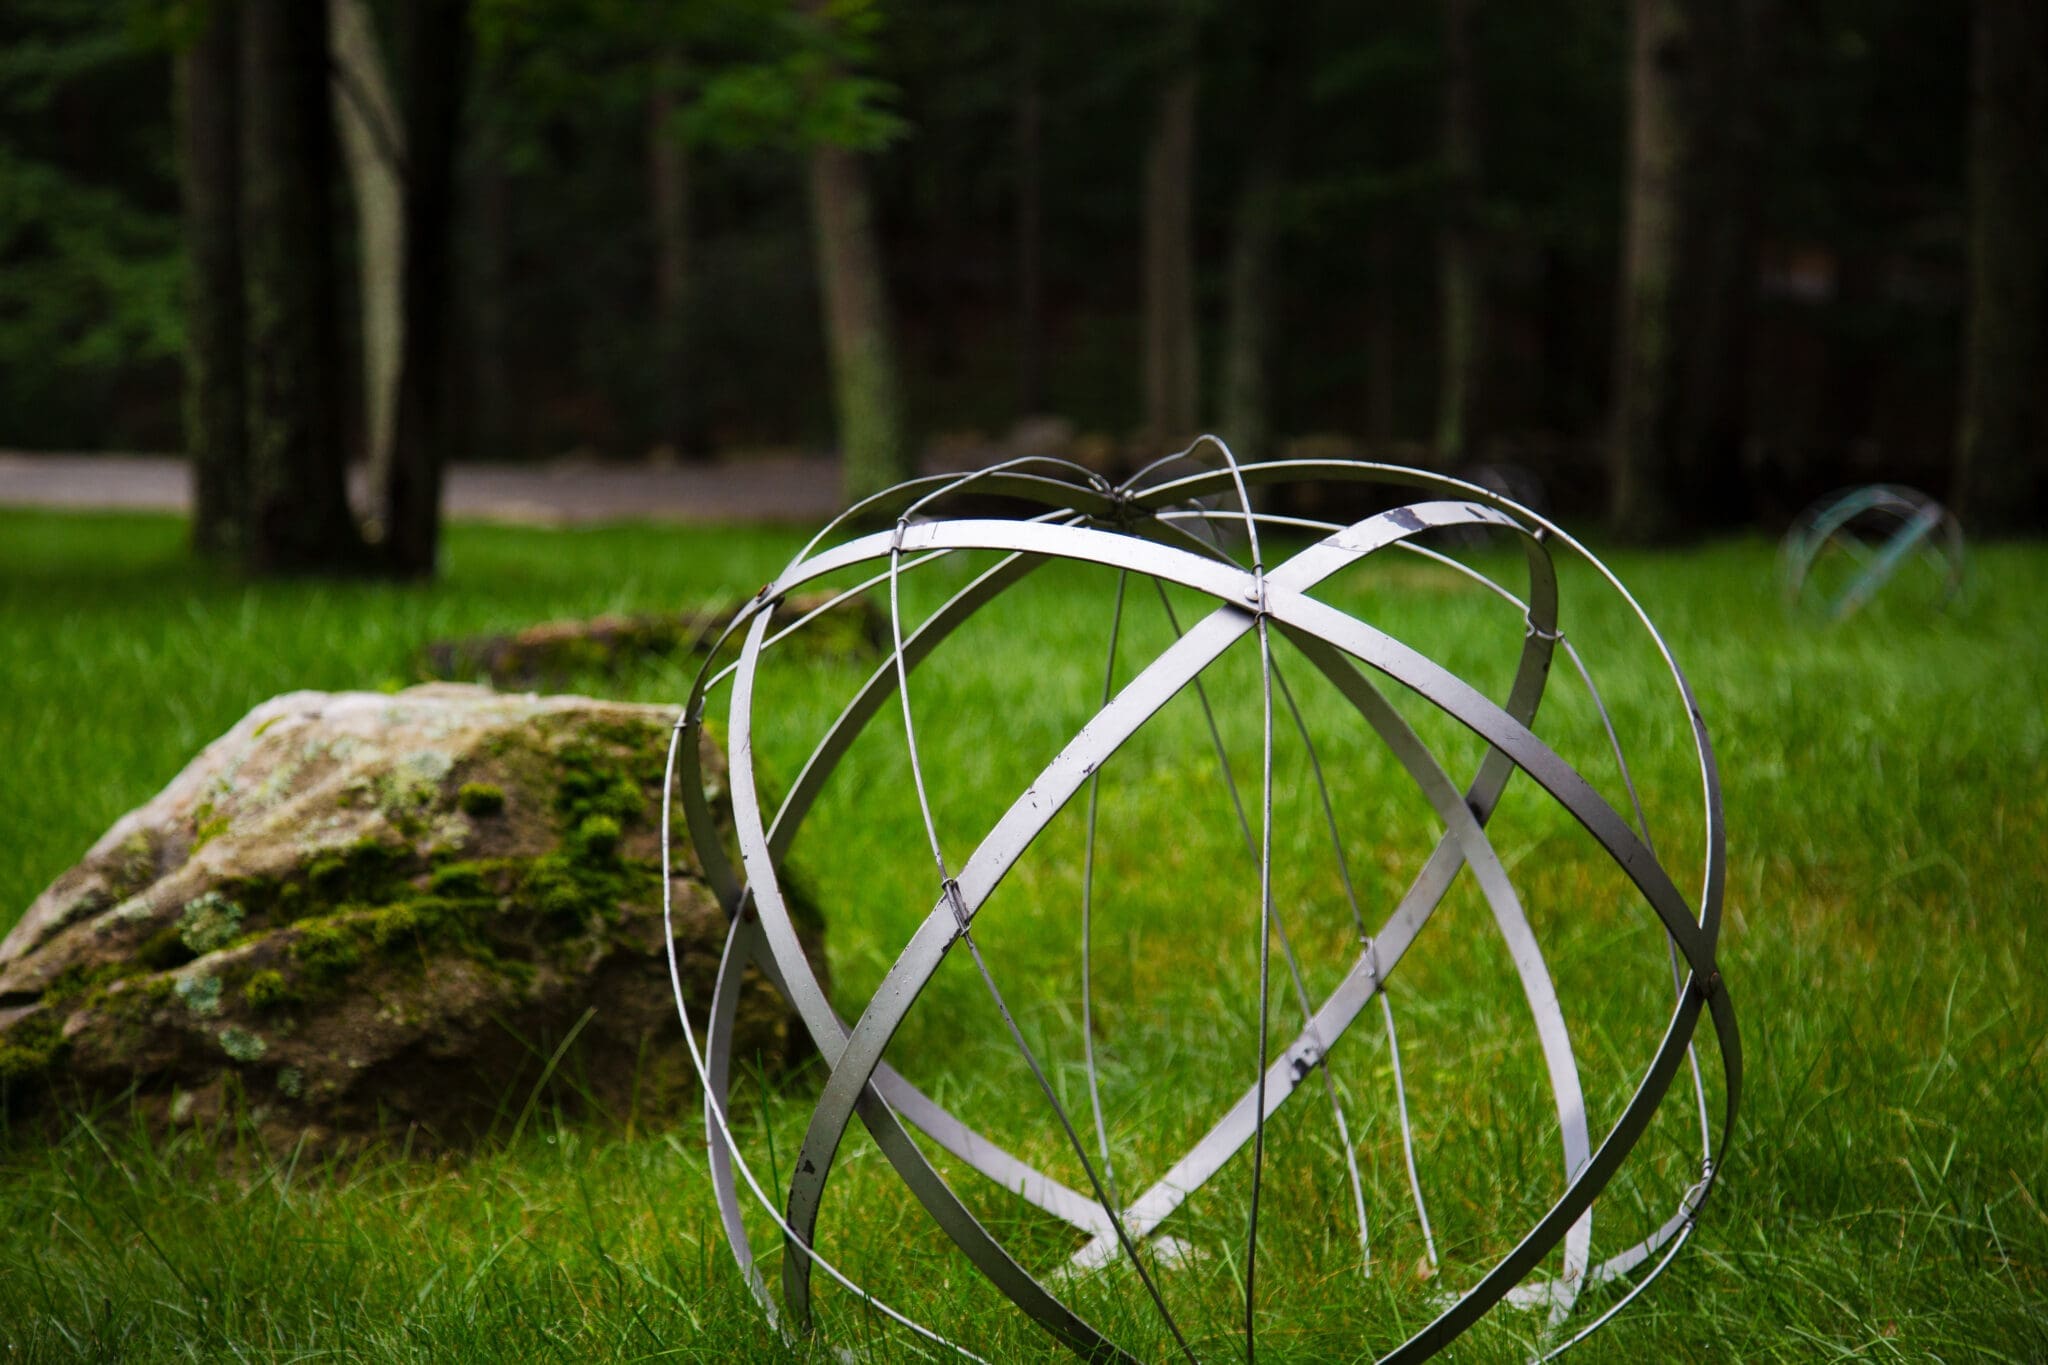 A photo of a spherical wire sculpture on a large grassy lawn.